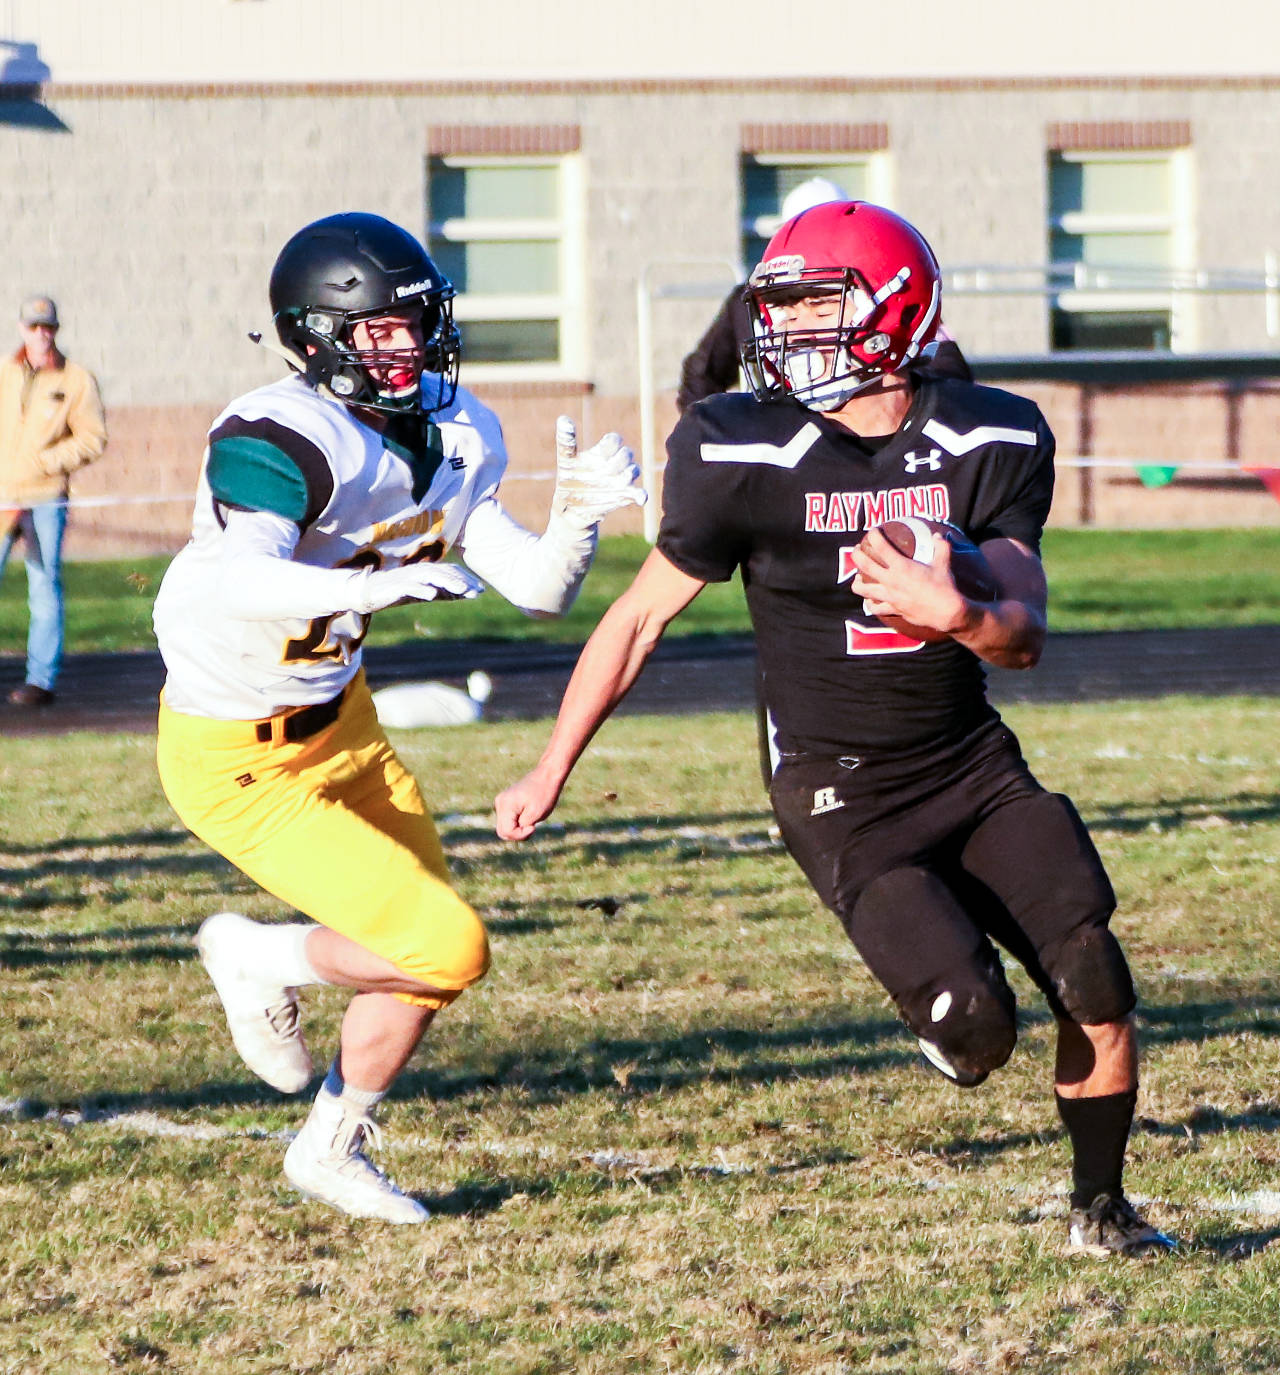 Raymond running back Joseph Vilalpando, right, carries the football during Friday’s victory over Vashon Island in Raymond. Villalpando accounted for 216 total yards of offense in the Seagulls’ 21-7 win. (Photo by Larry Bale)